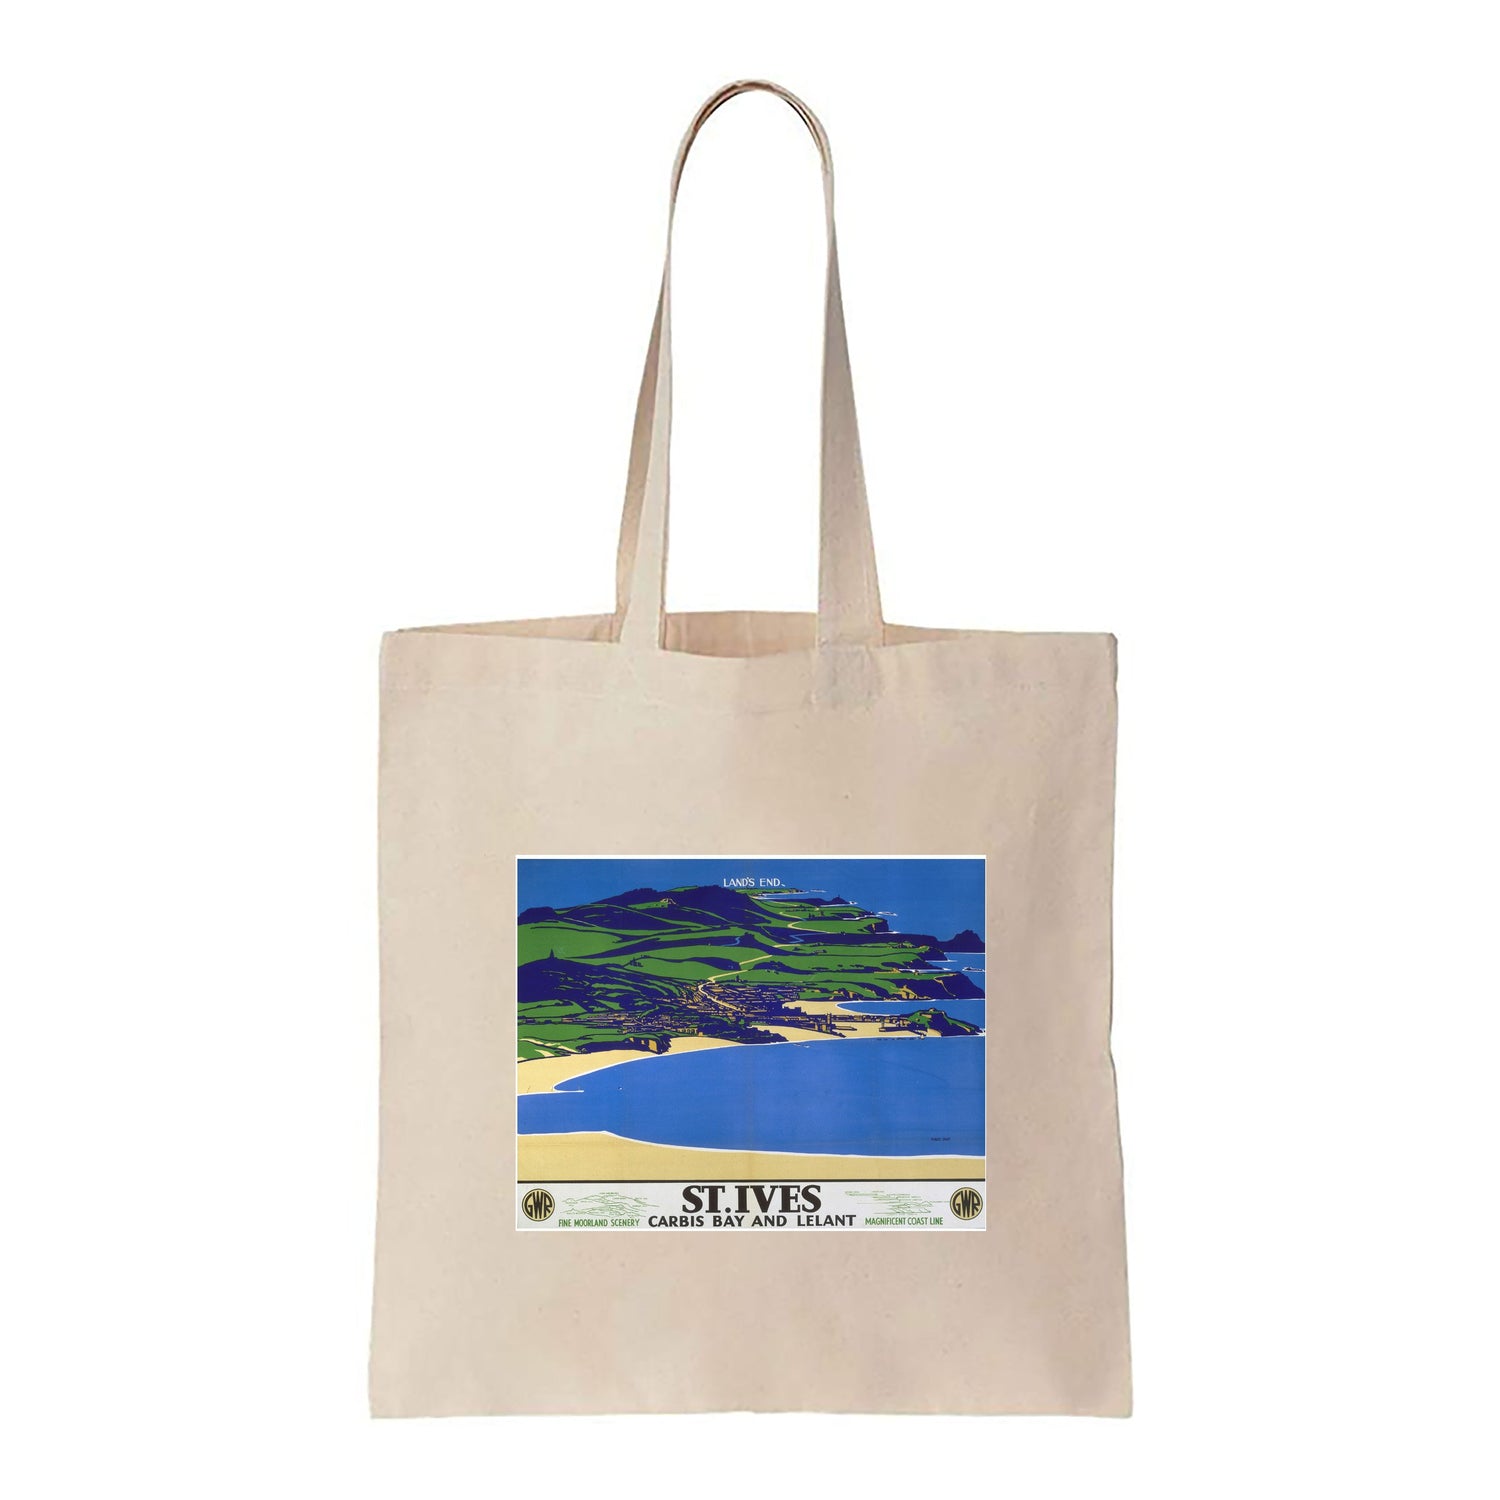 St Ives, Carbis Bay and Lelant - Canvas Tote Bag